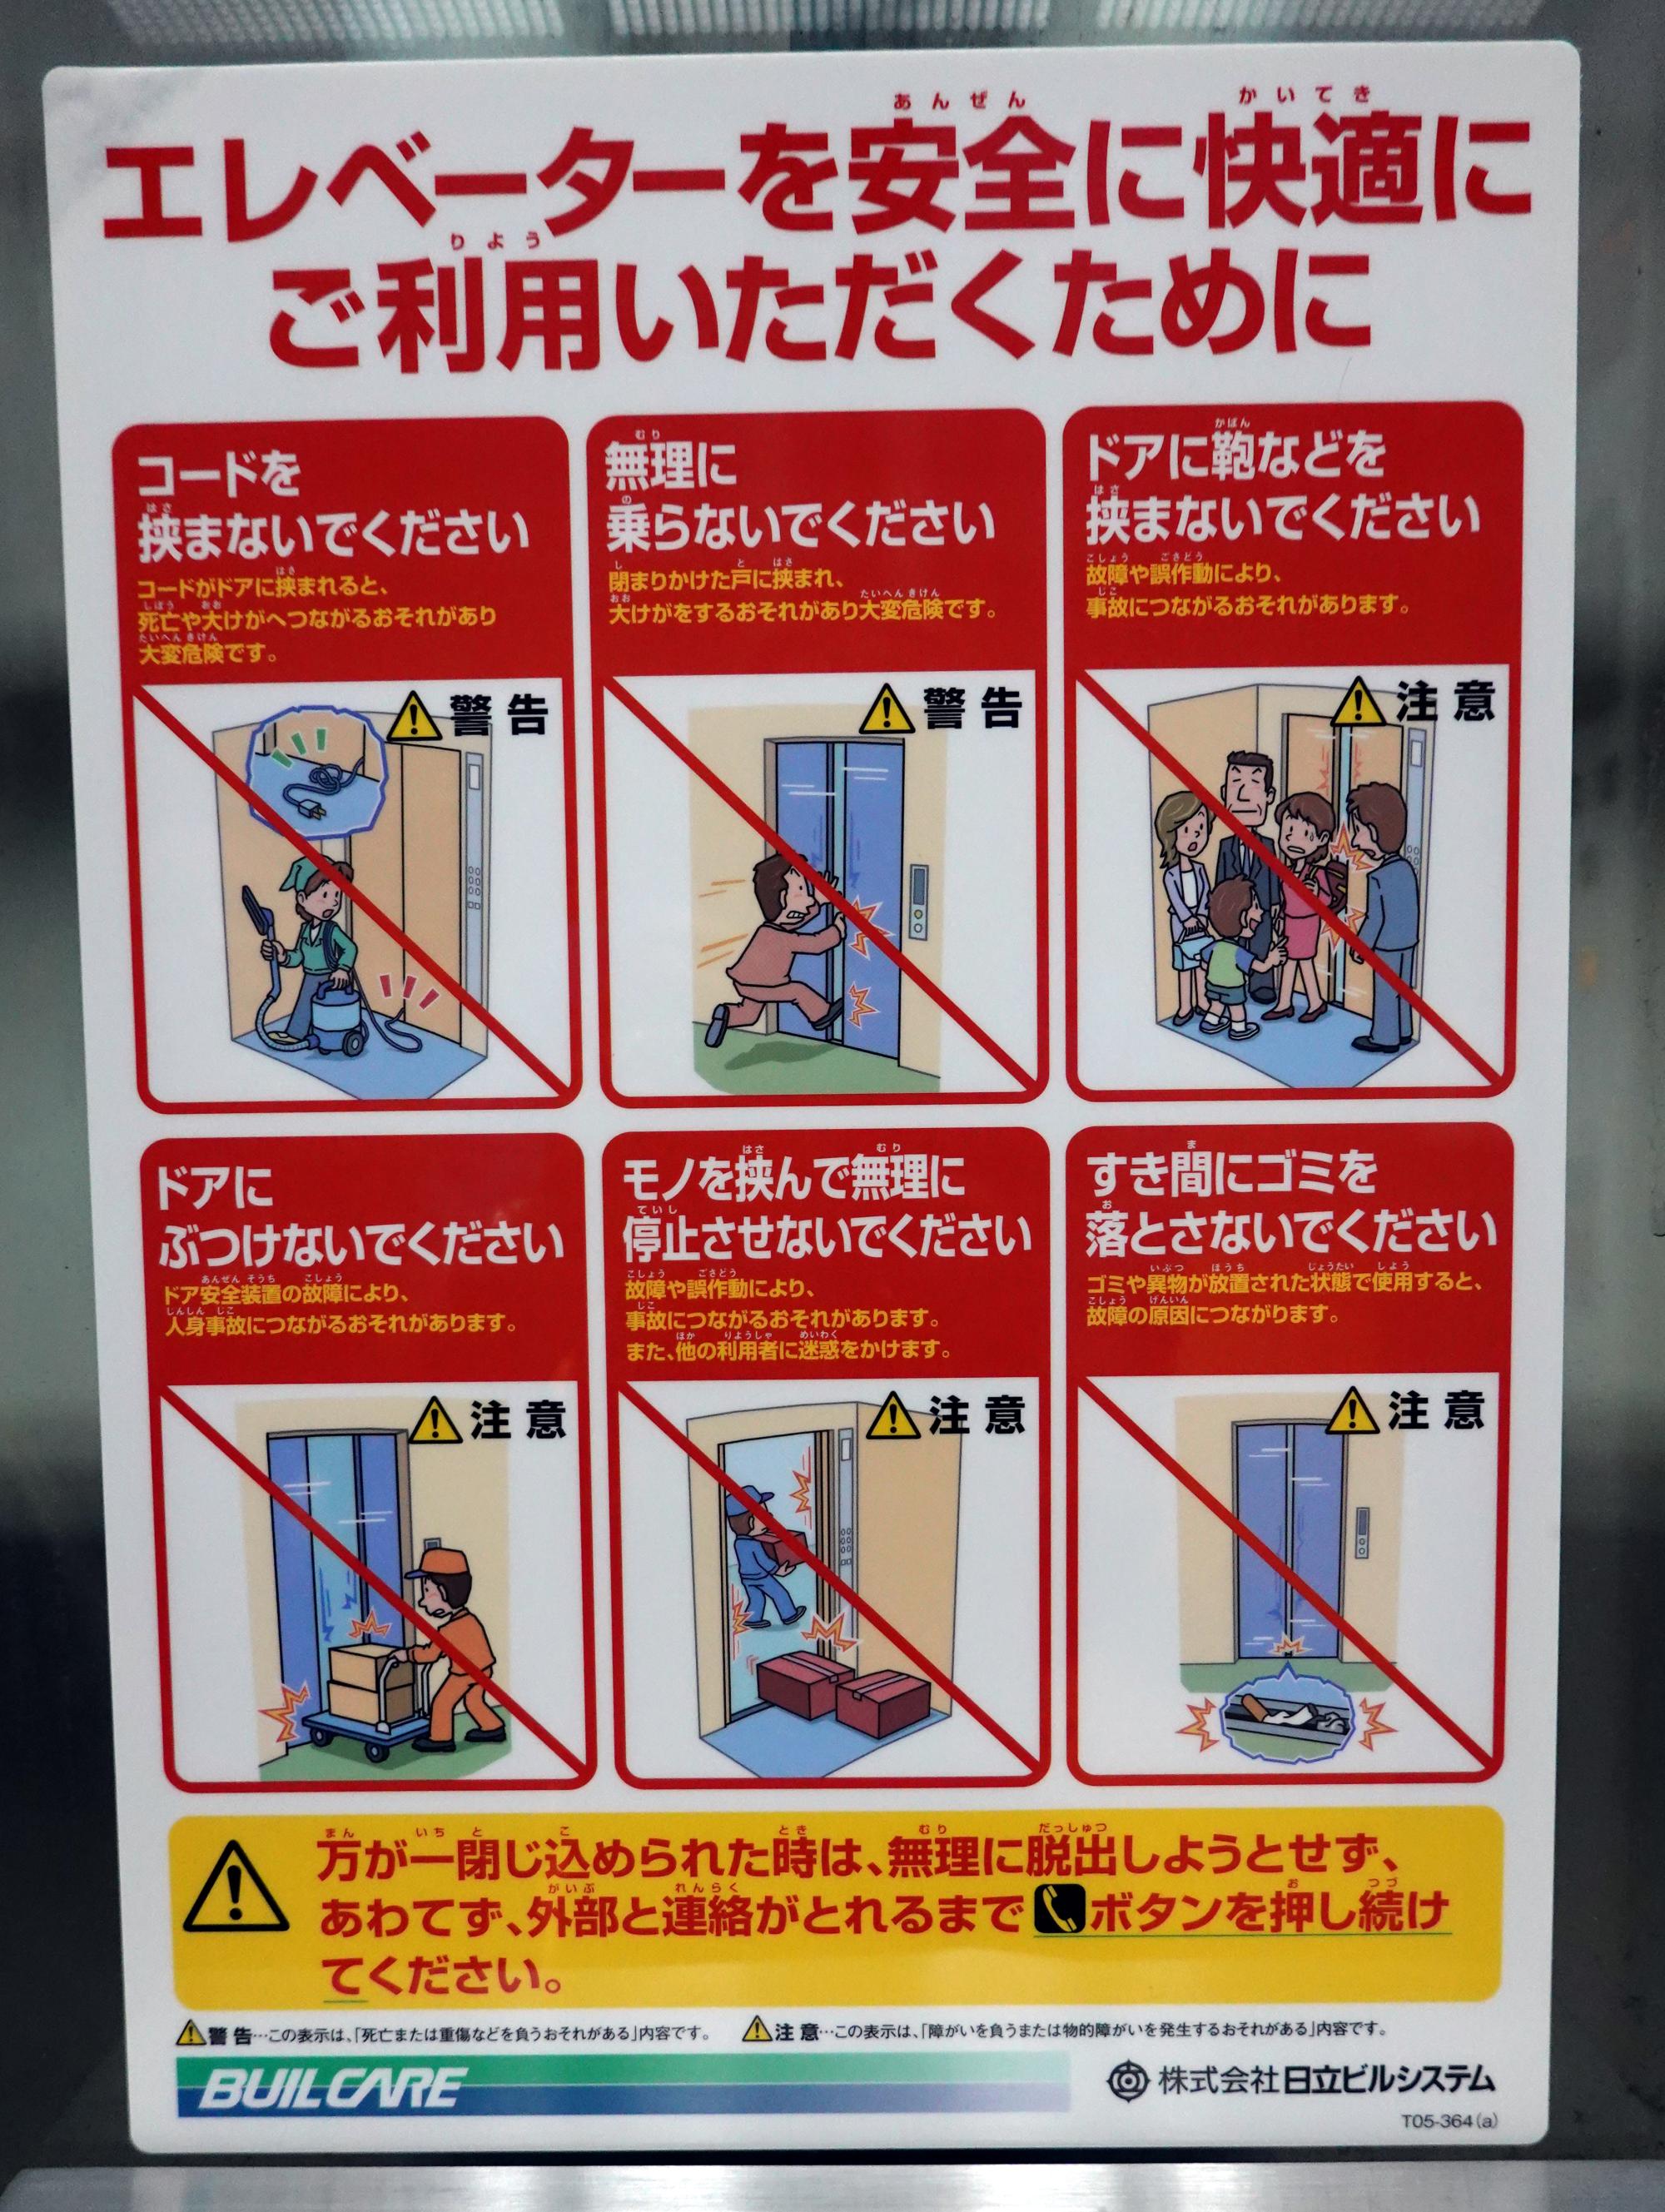 Signs Of Japan - Elevator Rules